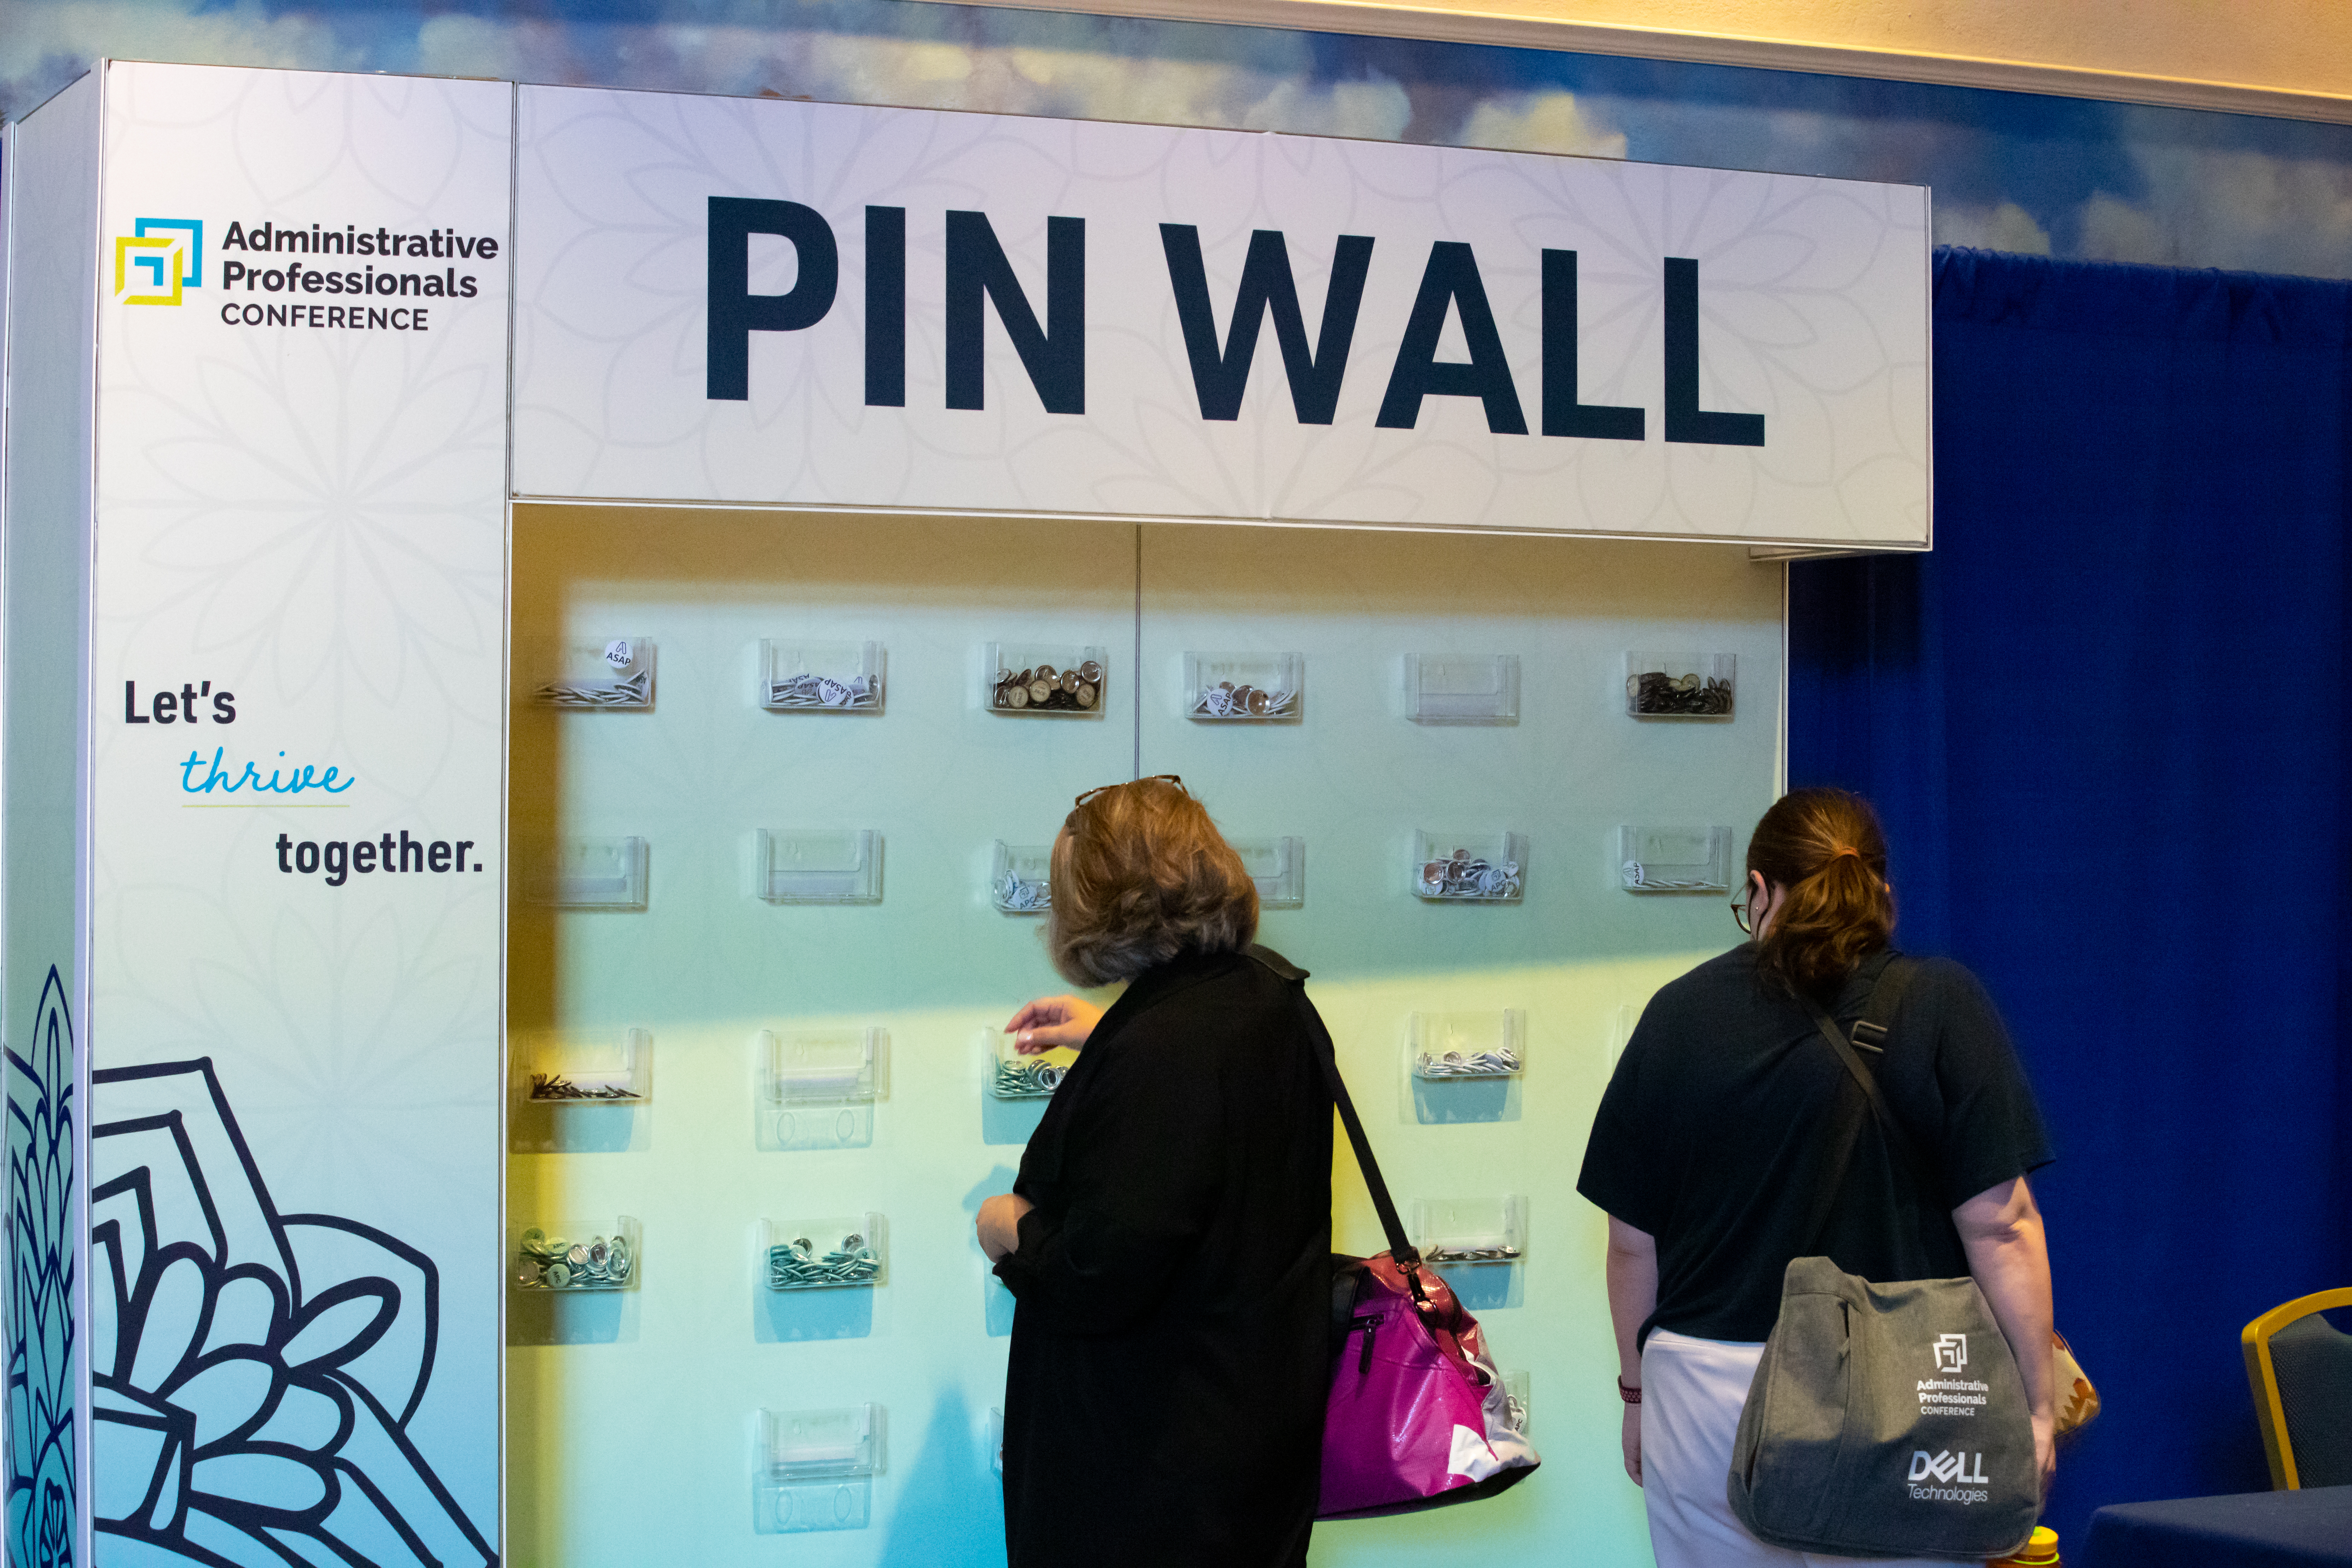 Event attendees at a pin wall